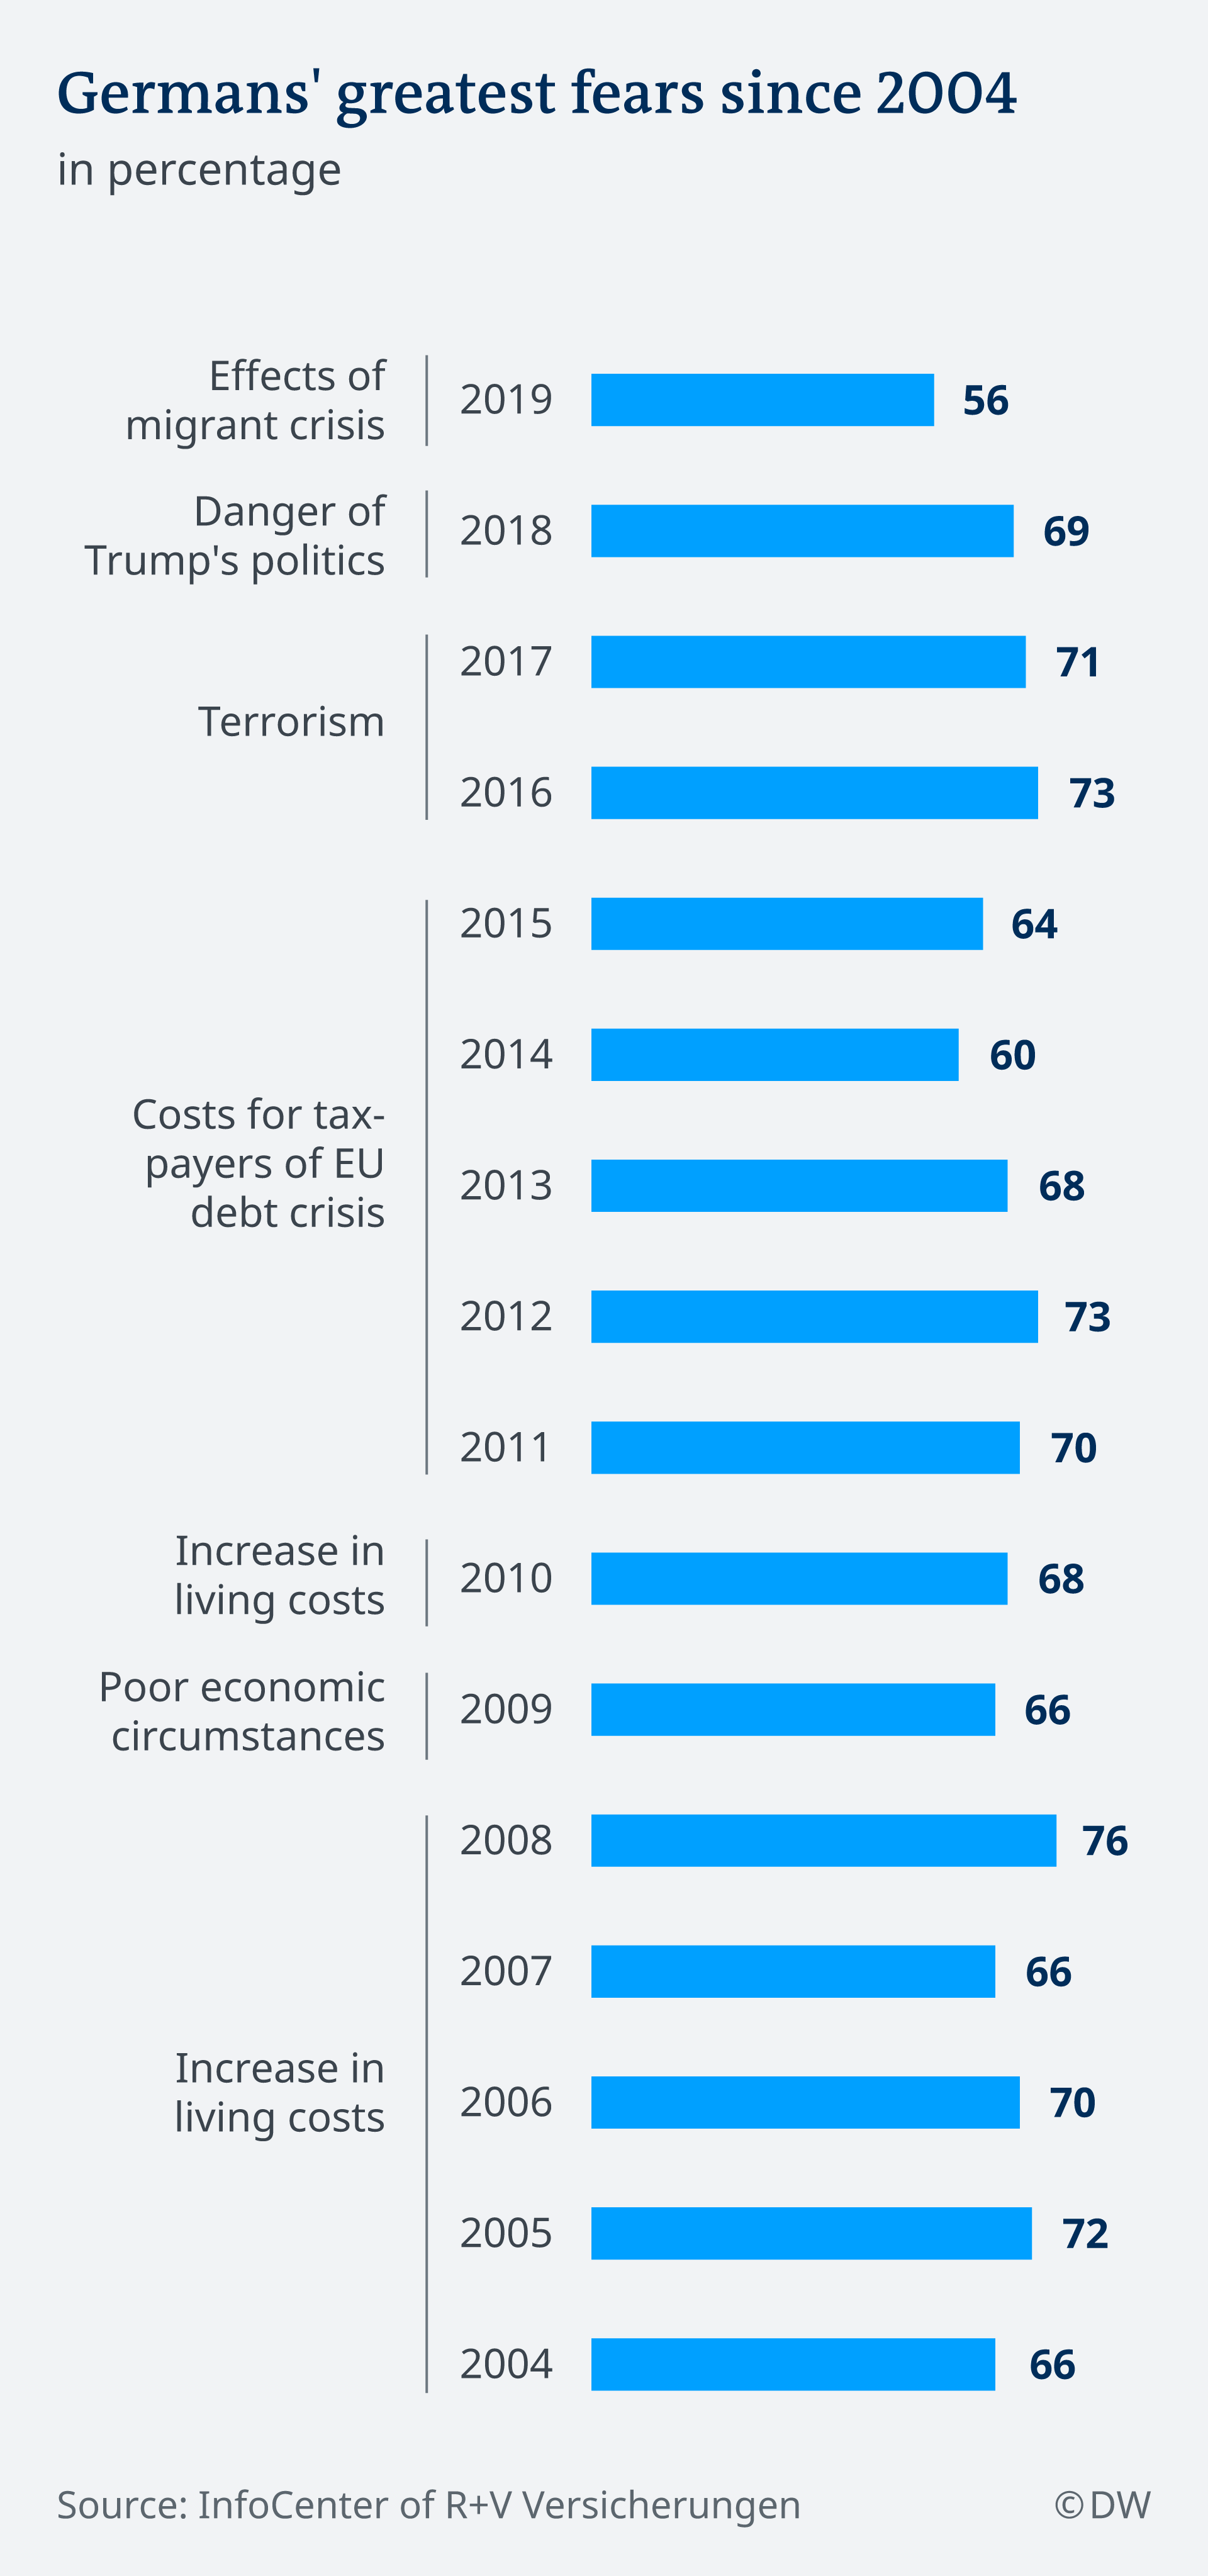 Graph showing Germans' greatest fears from 2004-2019